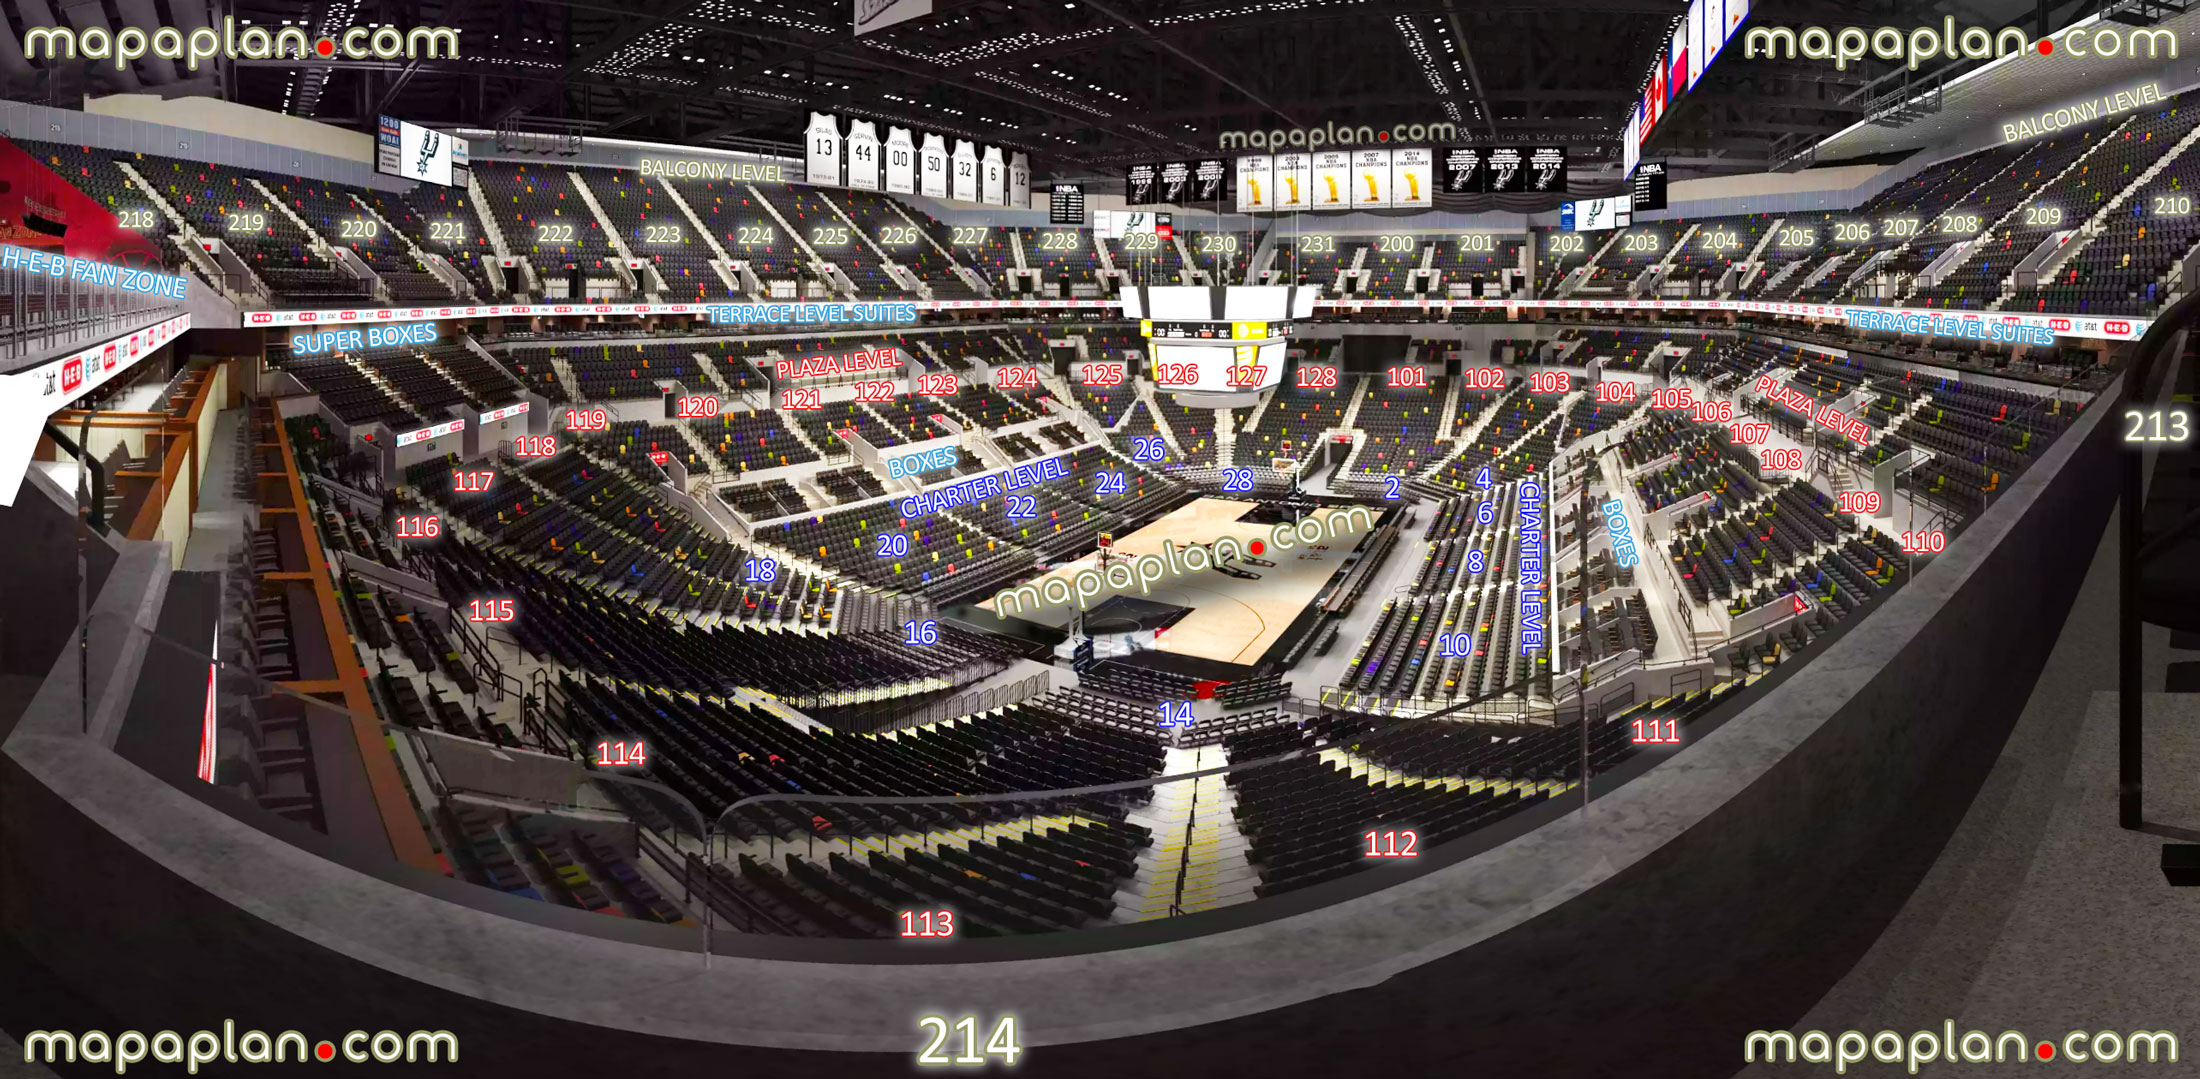 view section 214 row 1 seat 2 san antonio spurs nba tx stars wnba ncaa basketball tournament game panorama charter 100 plaza terrace 200 balcony level heb fan zone courtside club level vip boxes premium suites San Antonio AT&T Center seating chart